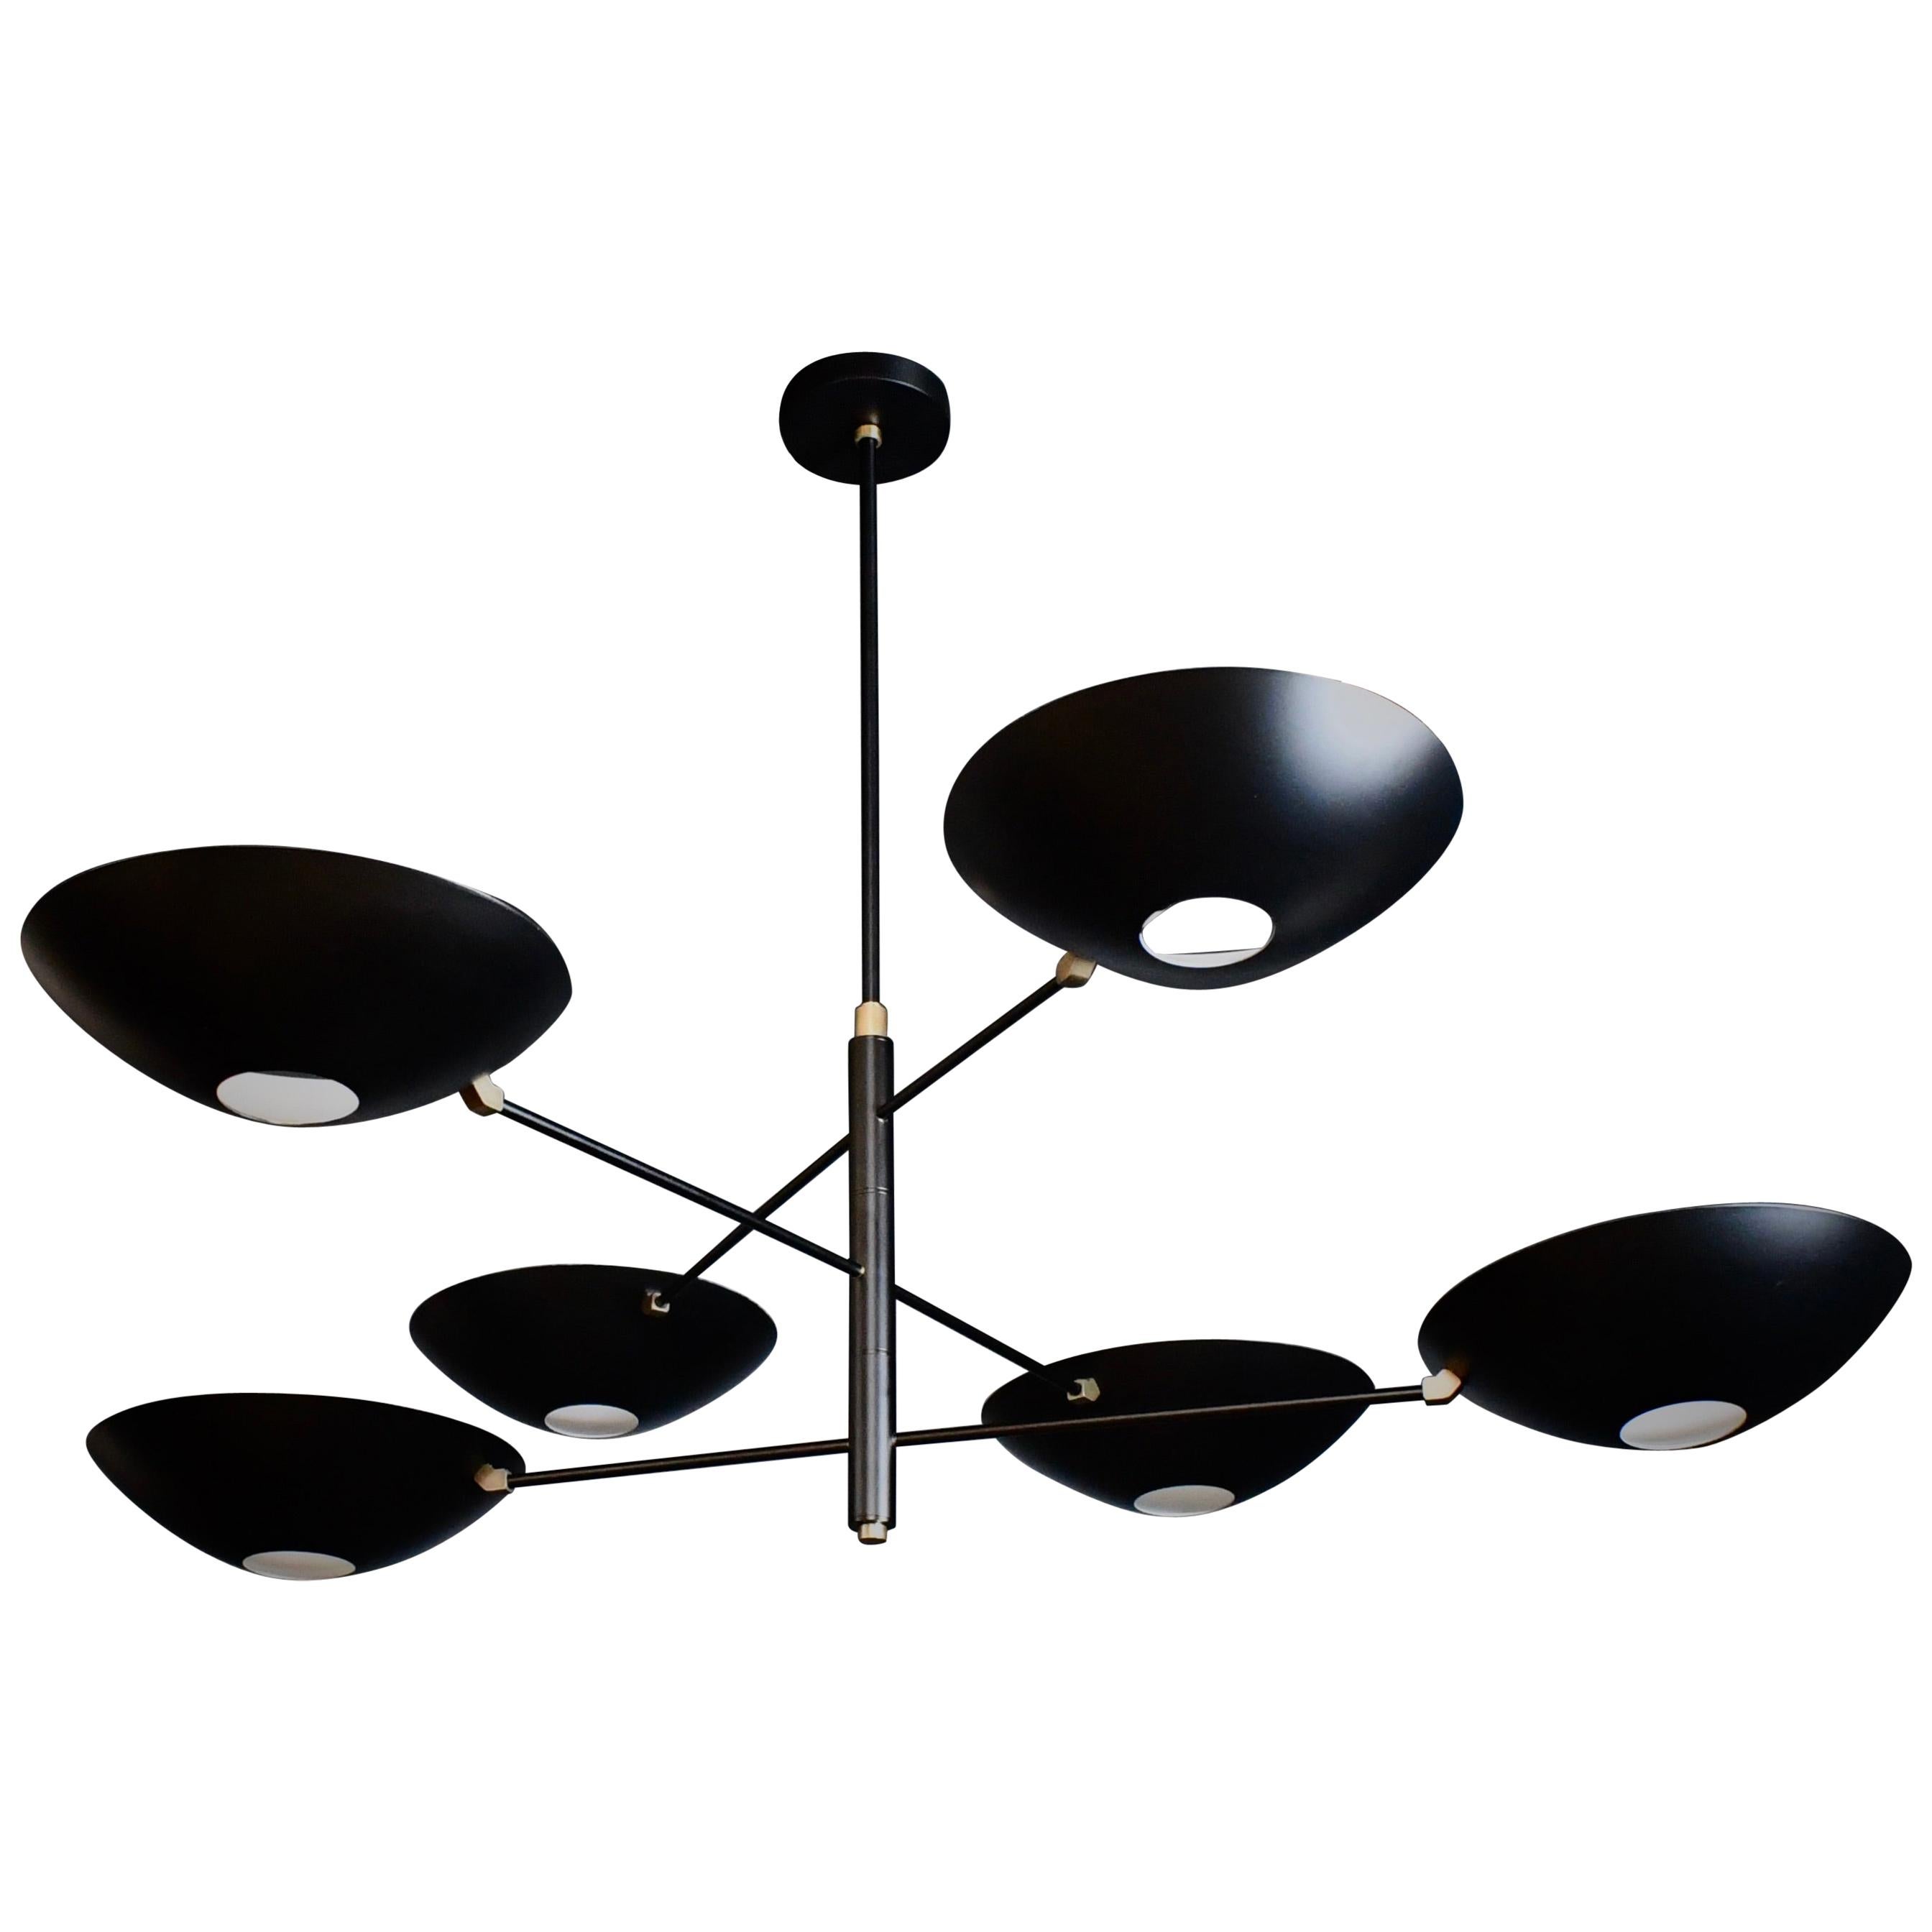 Large Counterbalance Ceiling Fixture in Matte Black Made by Blueprint Lighting